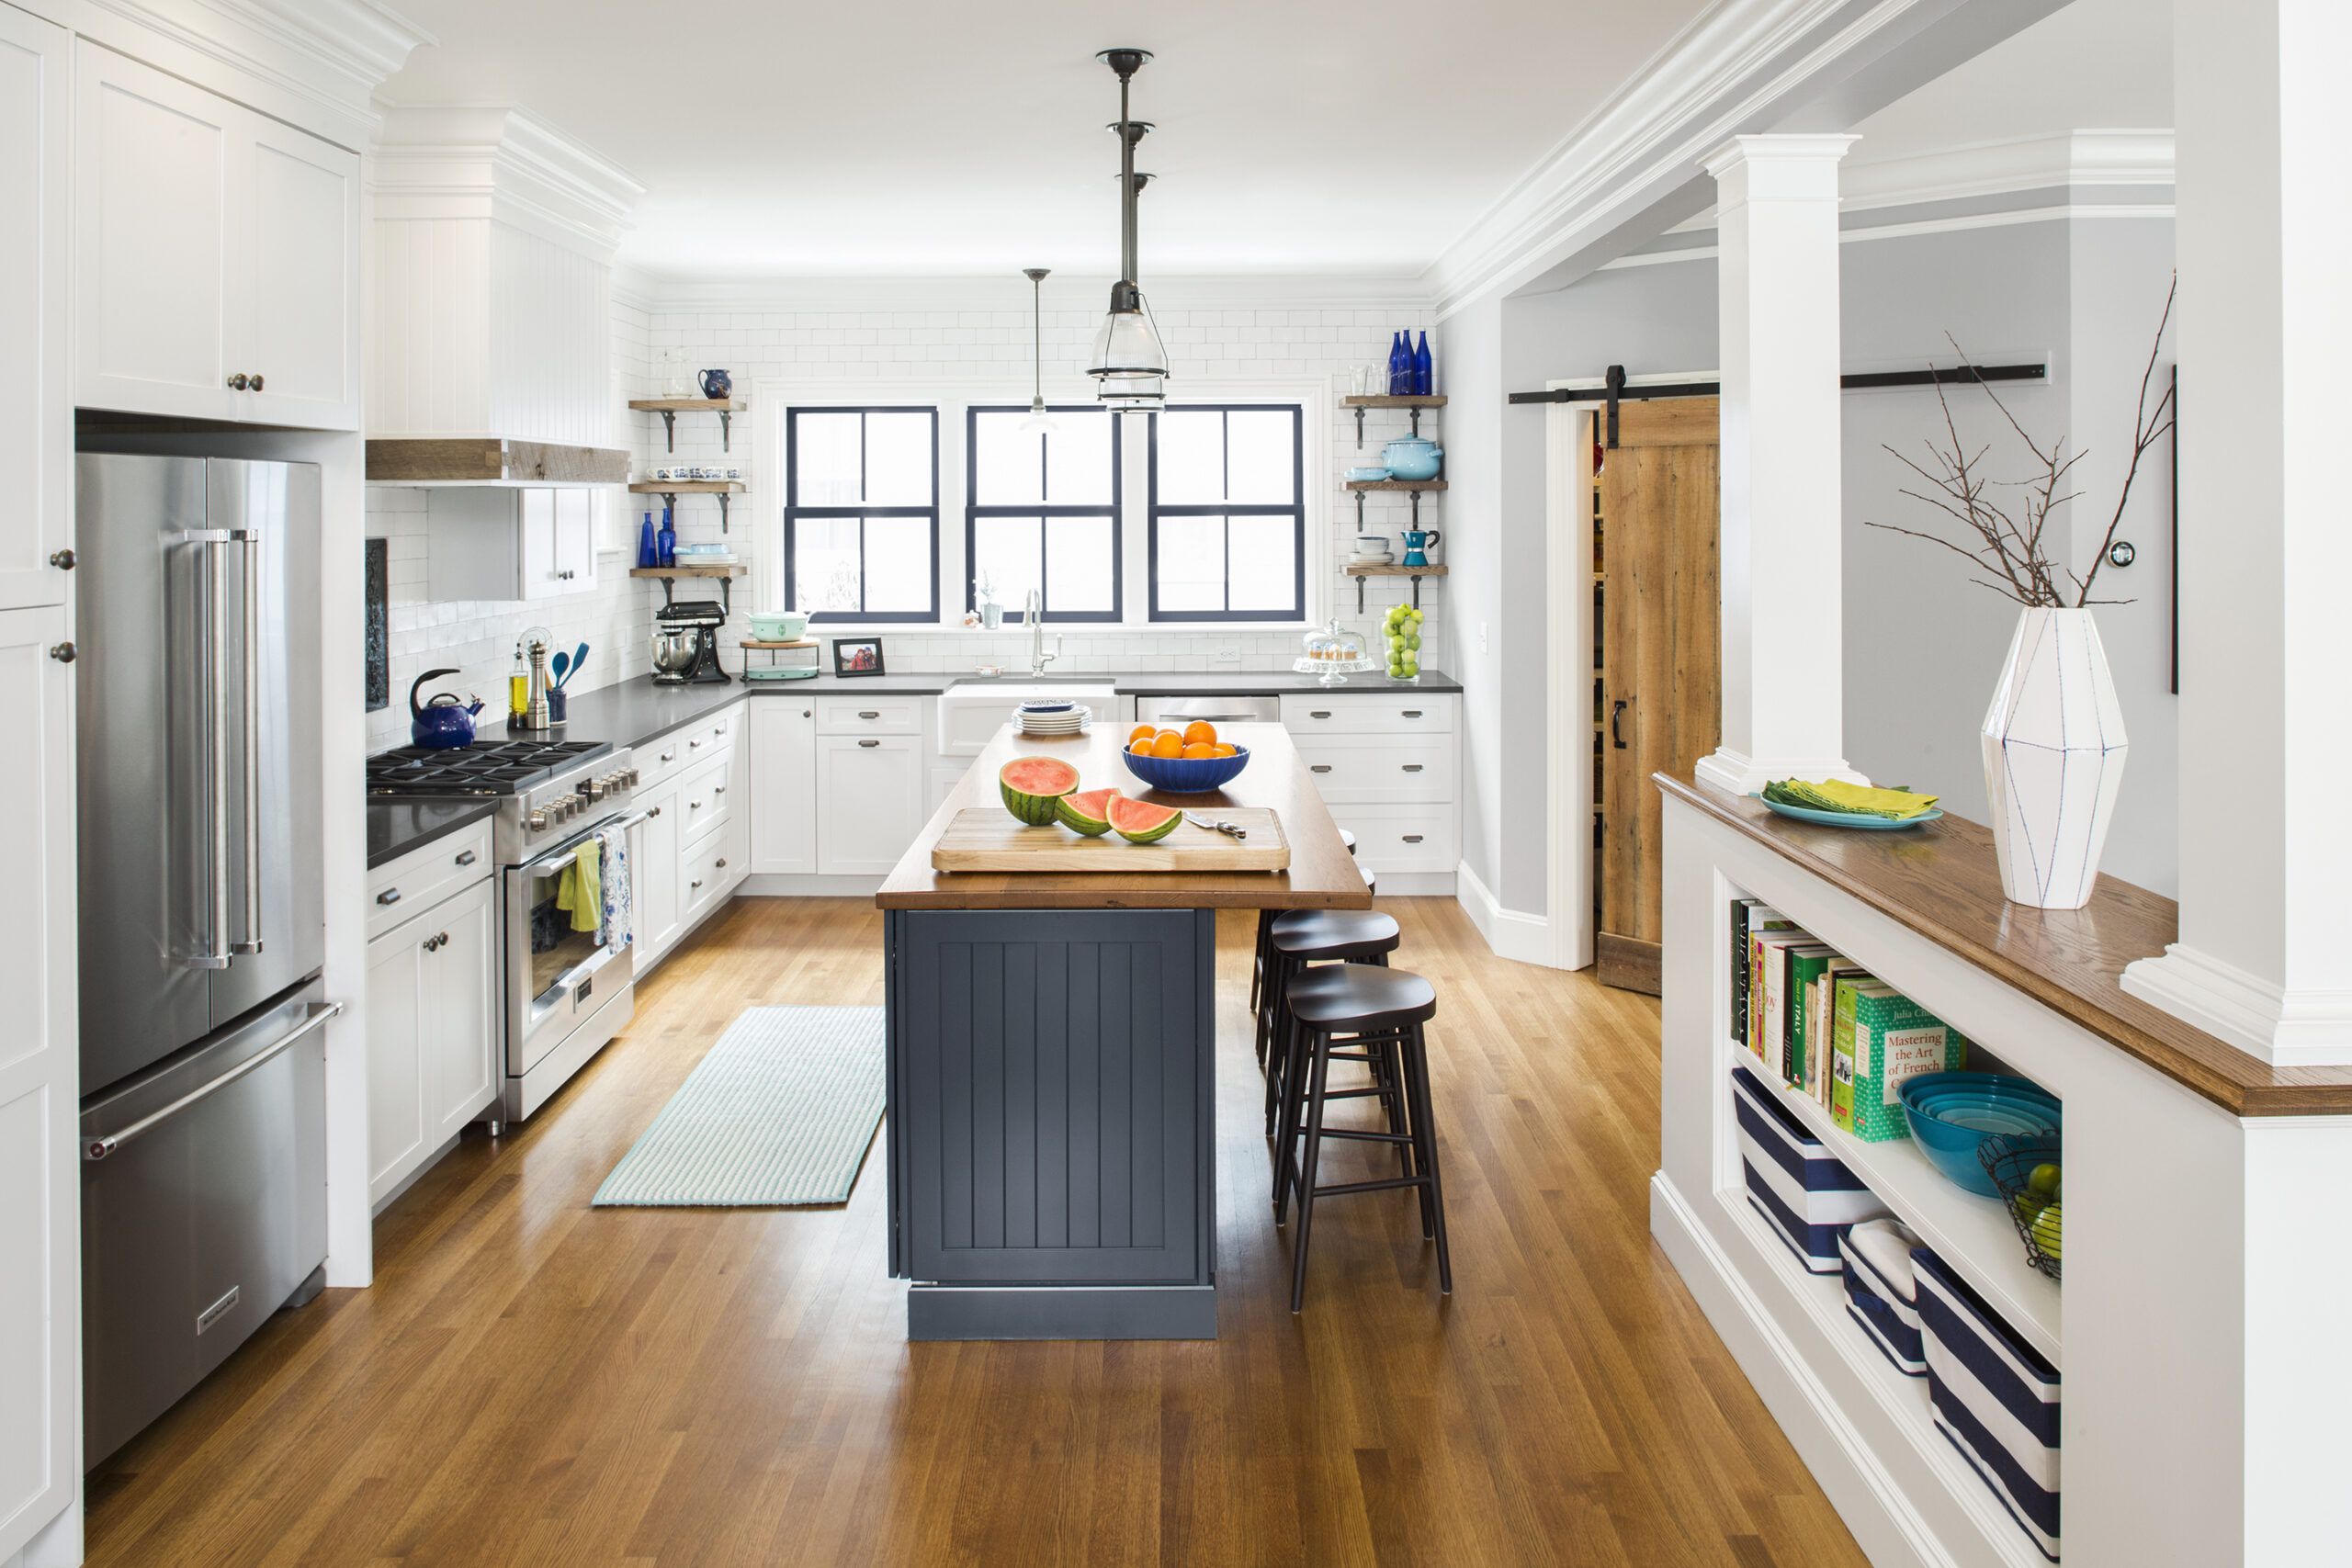 What Factors to Consider When Renovating a Kitchen